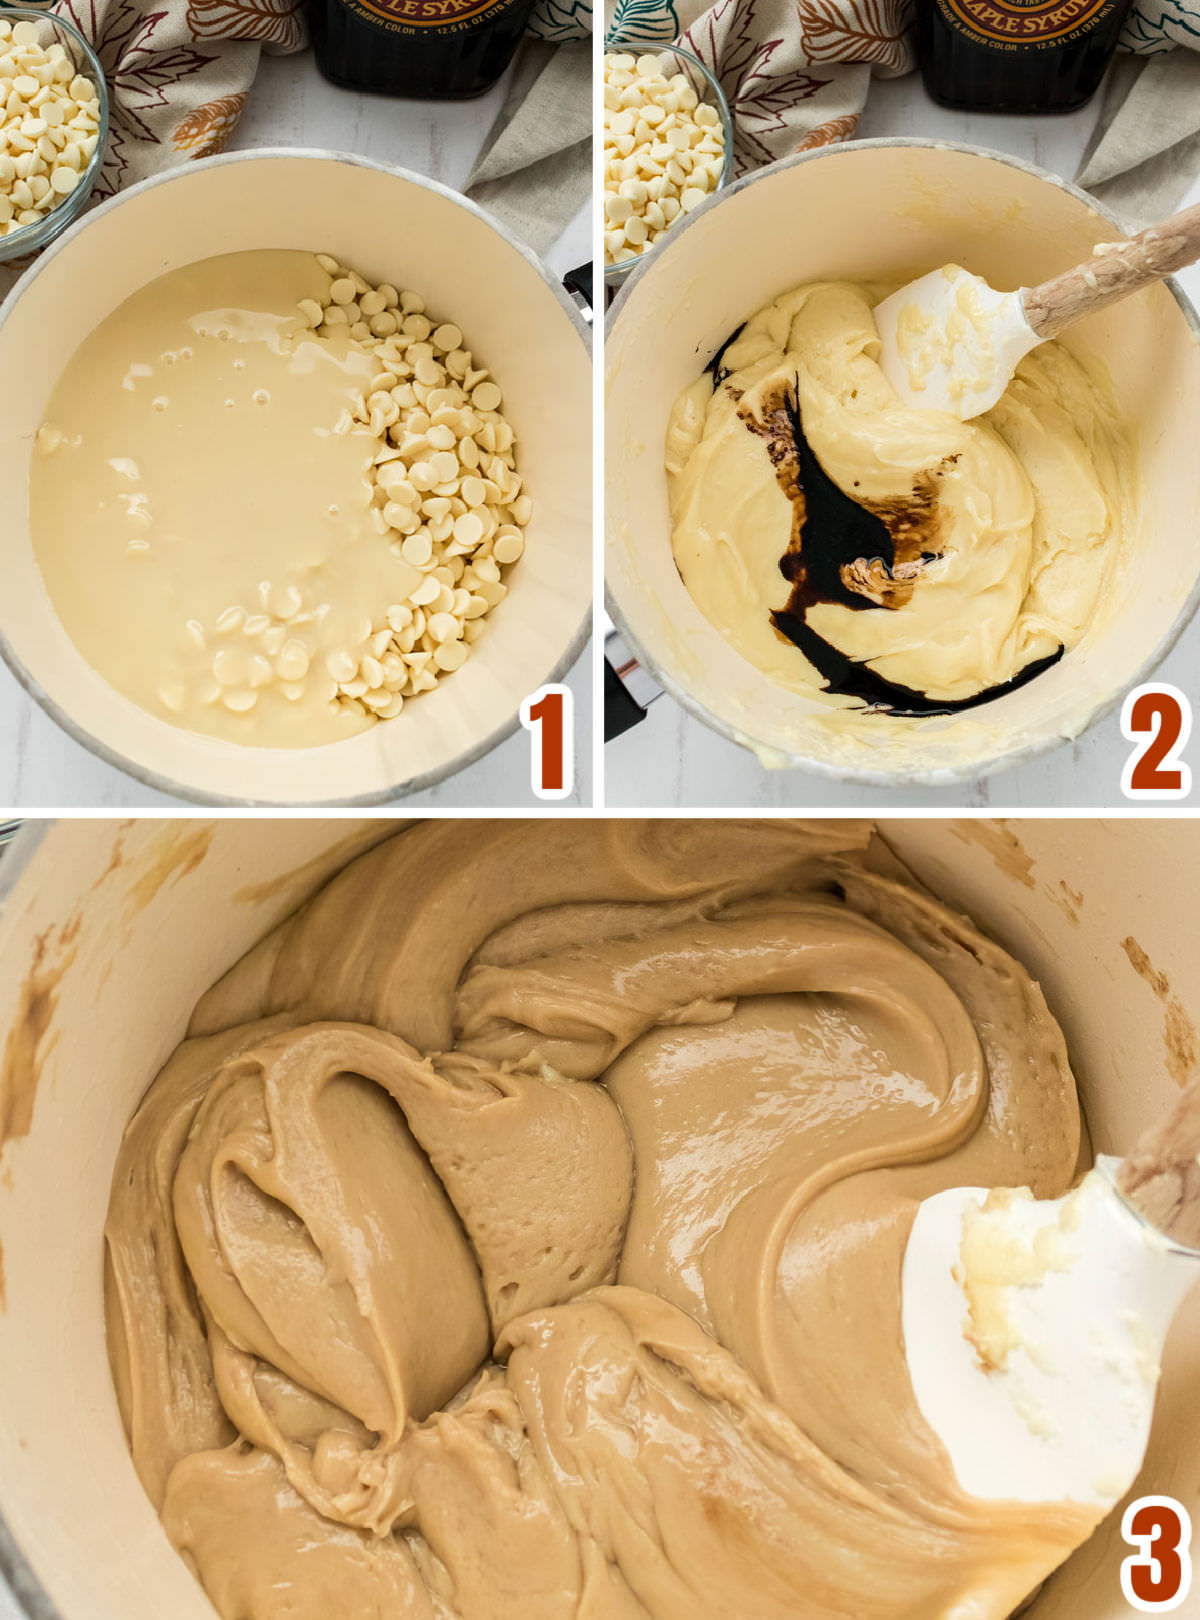 Collage image showing how to make the Maple Fudge Mixture.